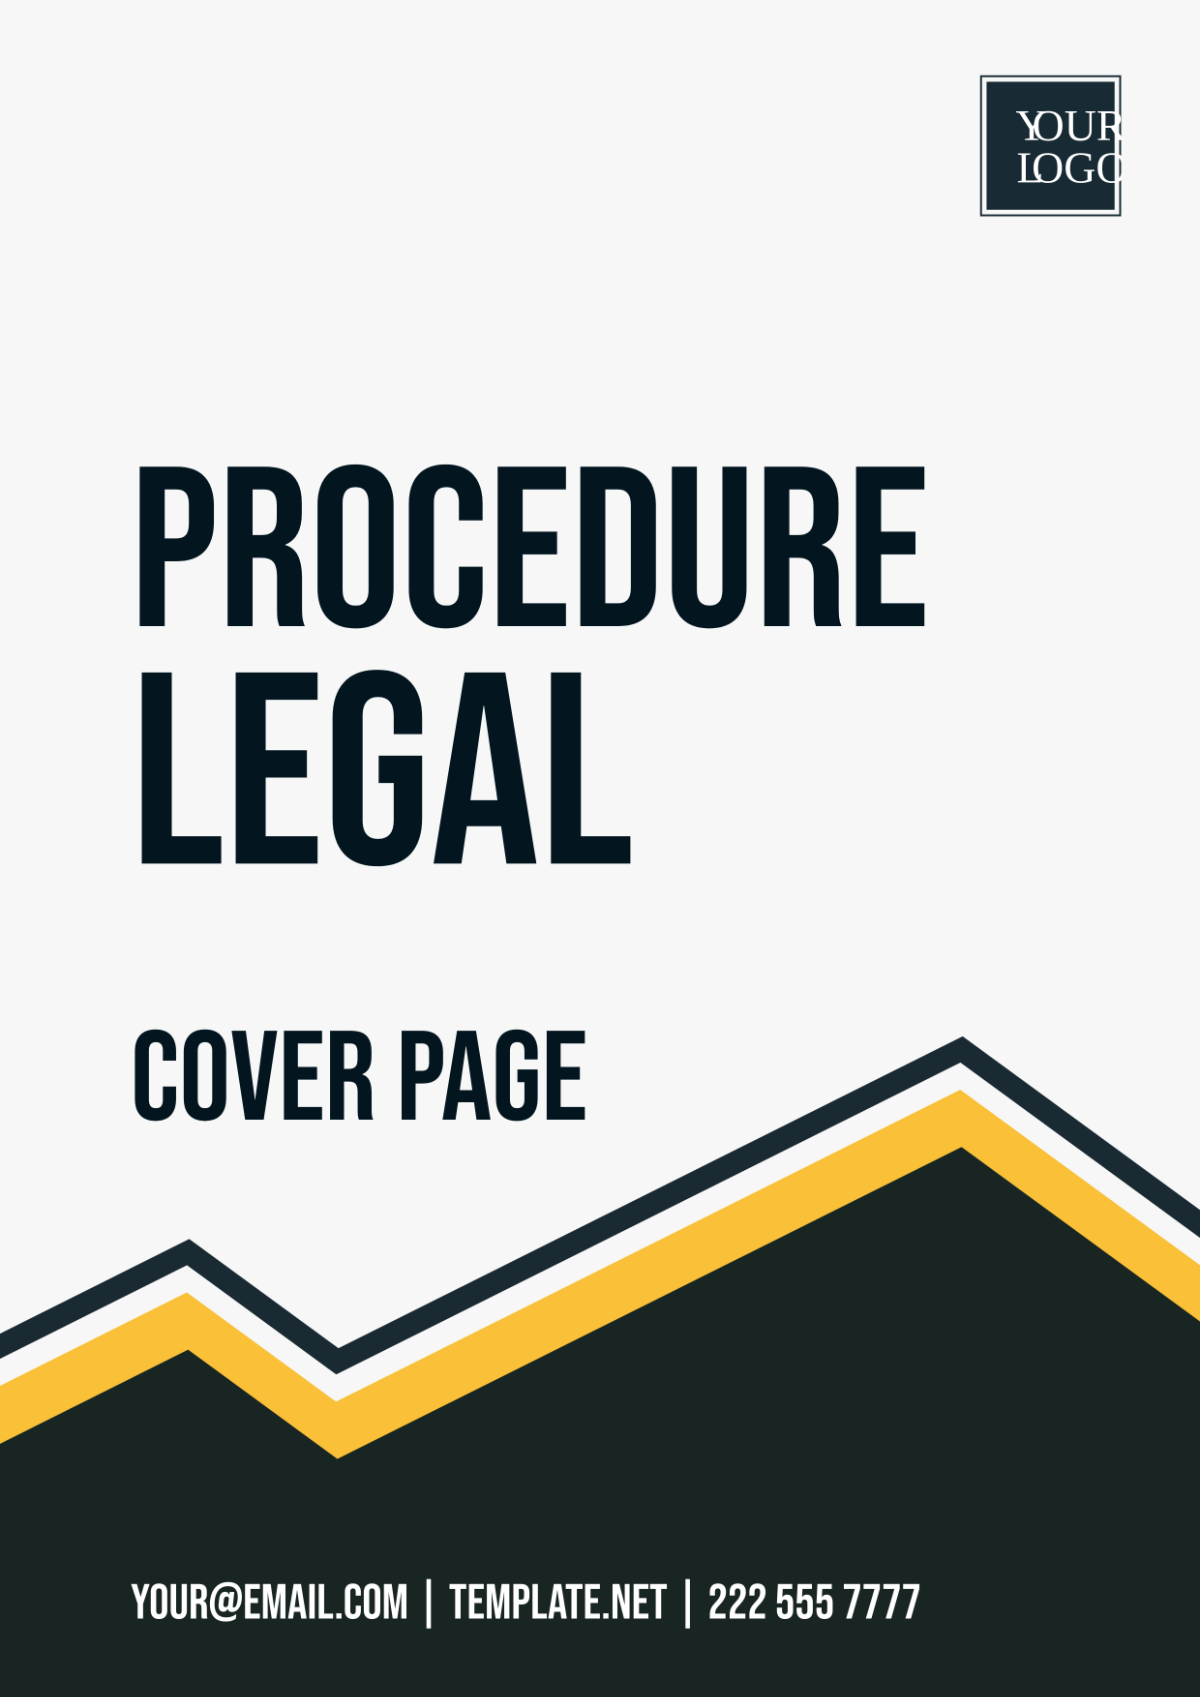 Procedure Legal Cover Page